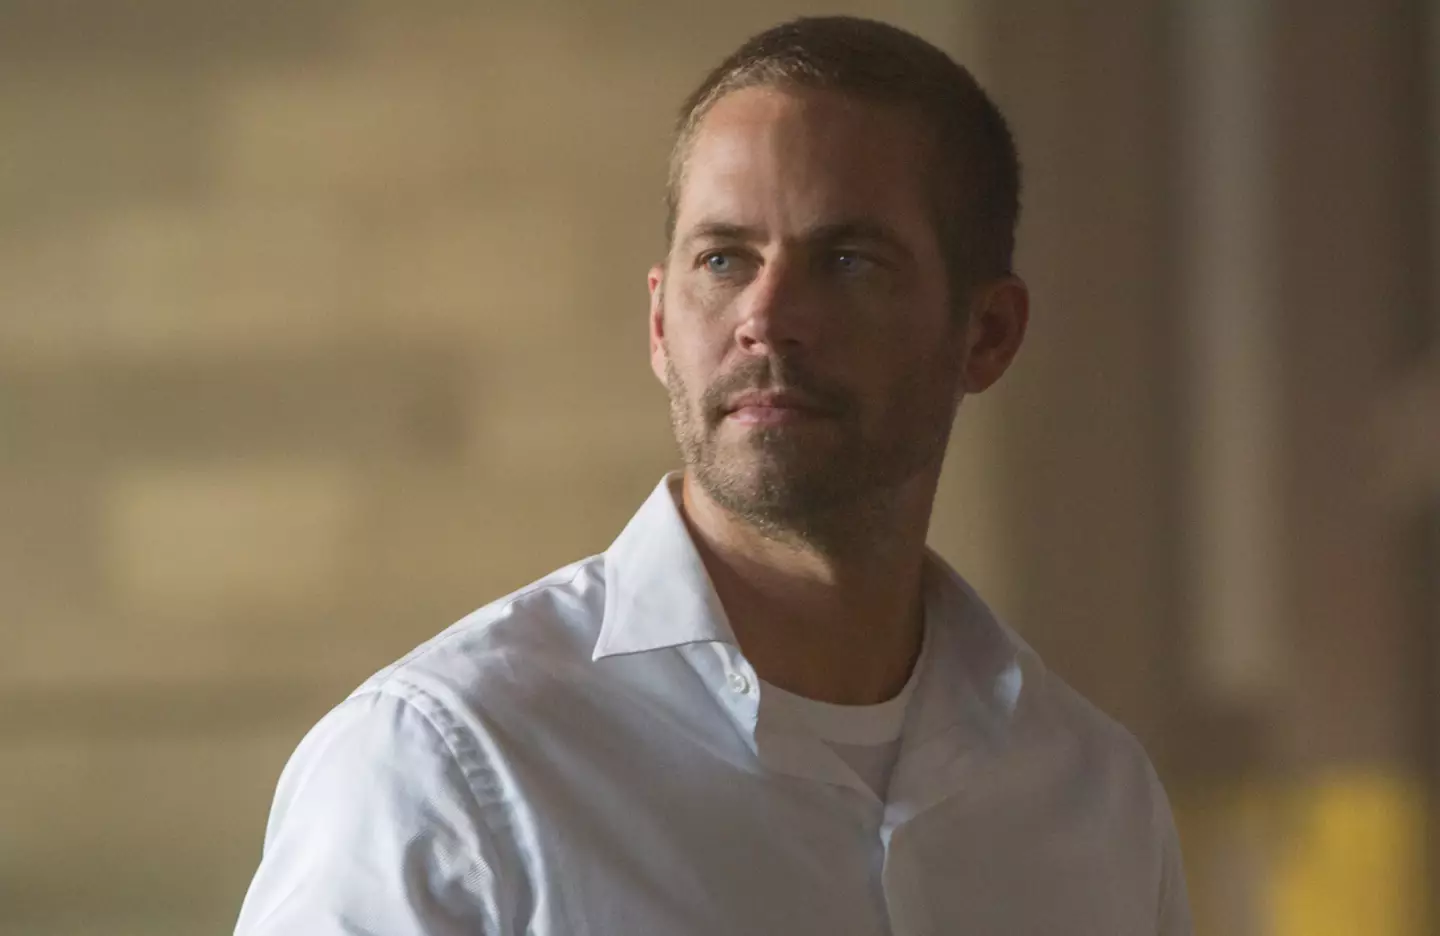 Paul Walker died during the production of Furious 7.